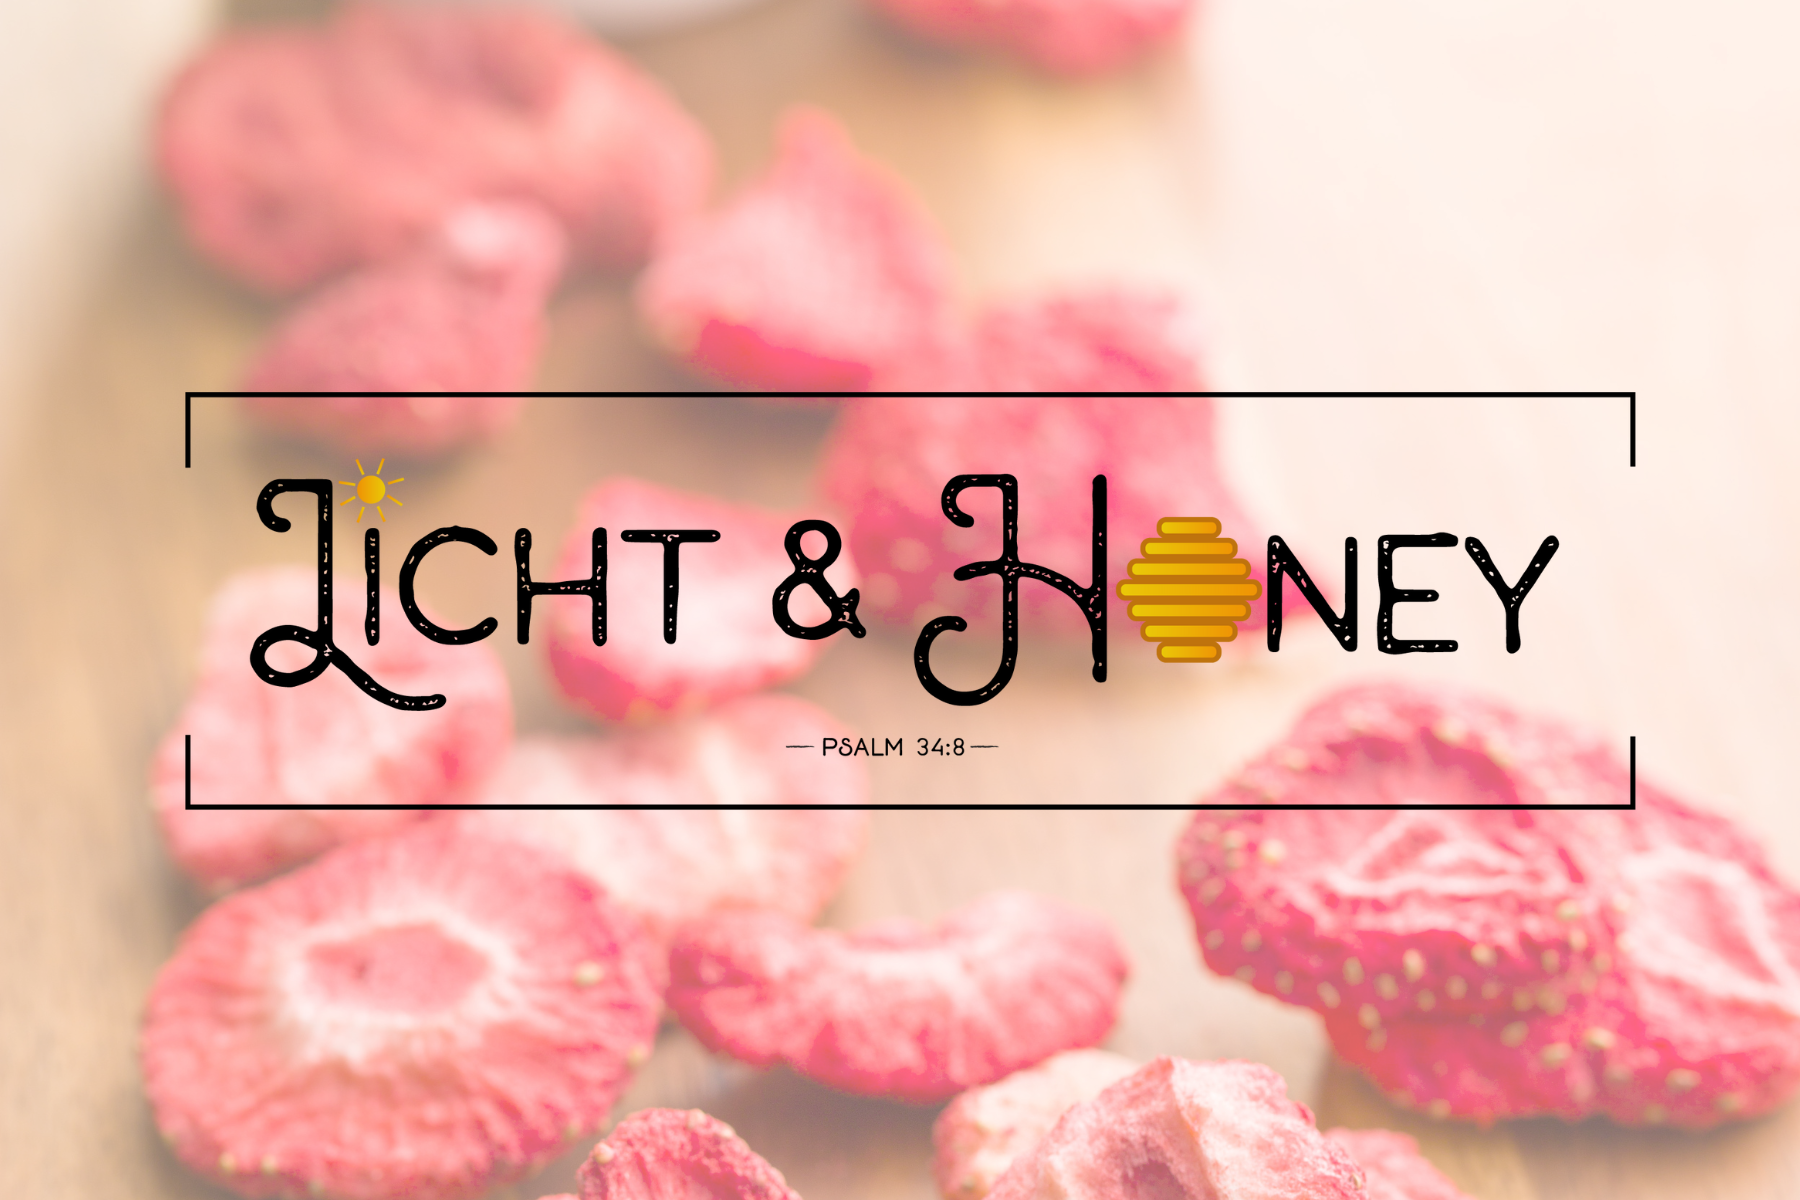 Licht & Honey Logo in front of freeze dried strawberries